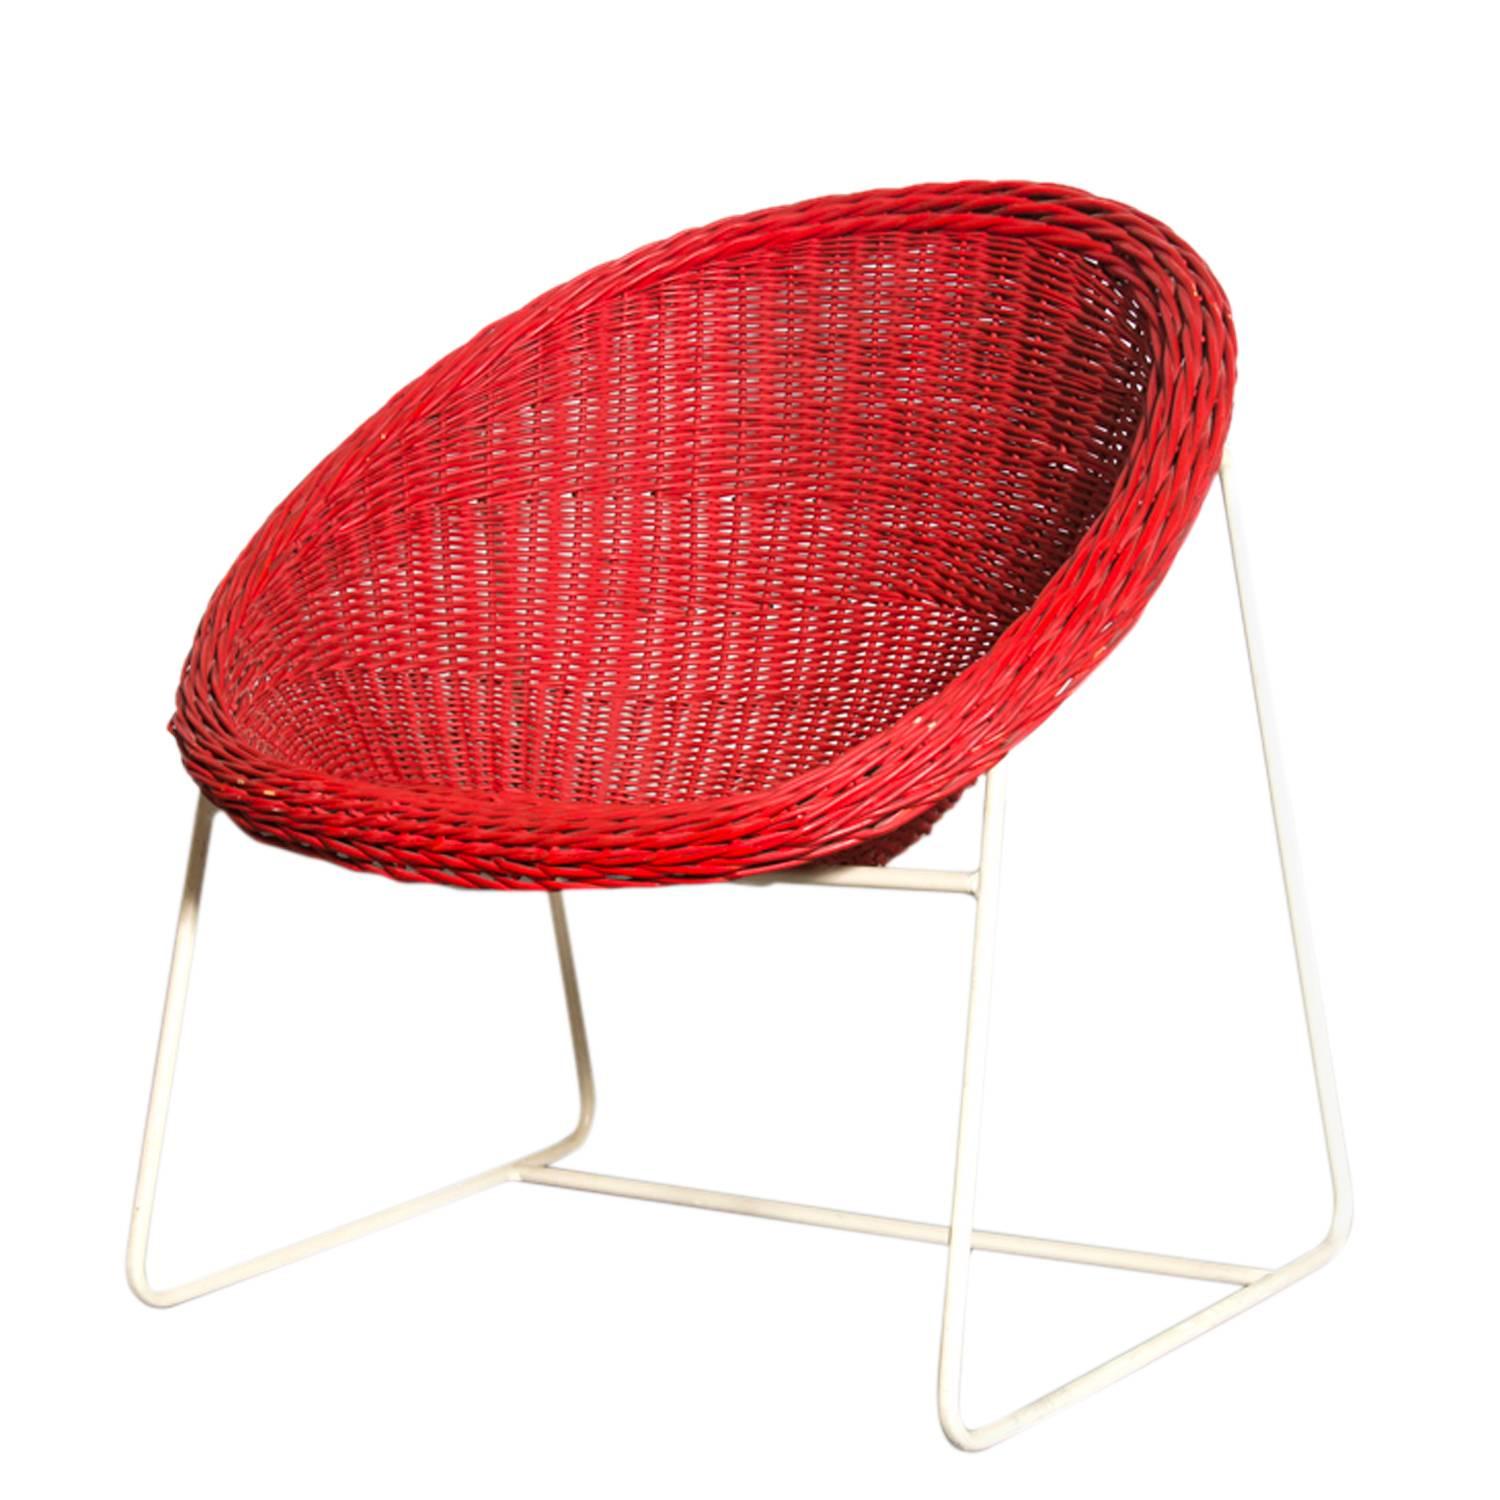 Jacques Adnet Inspired Red Woven Rattan and Wire Hoop Chair